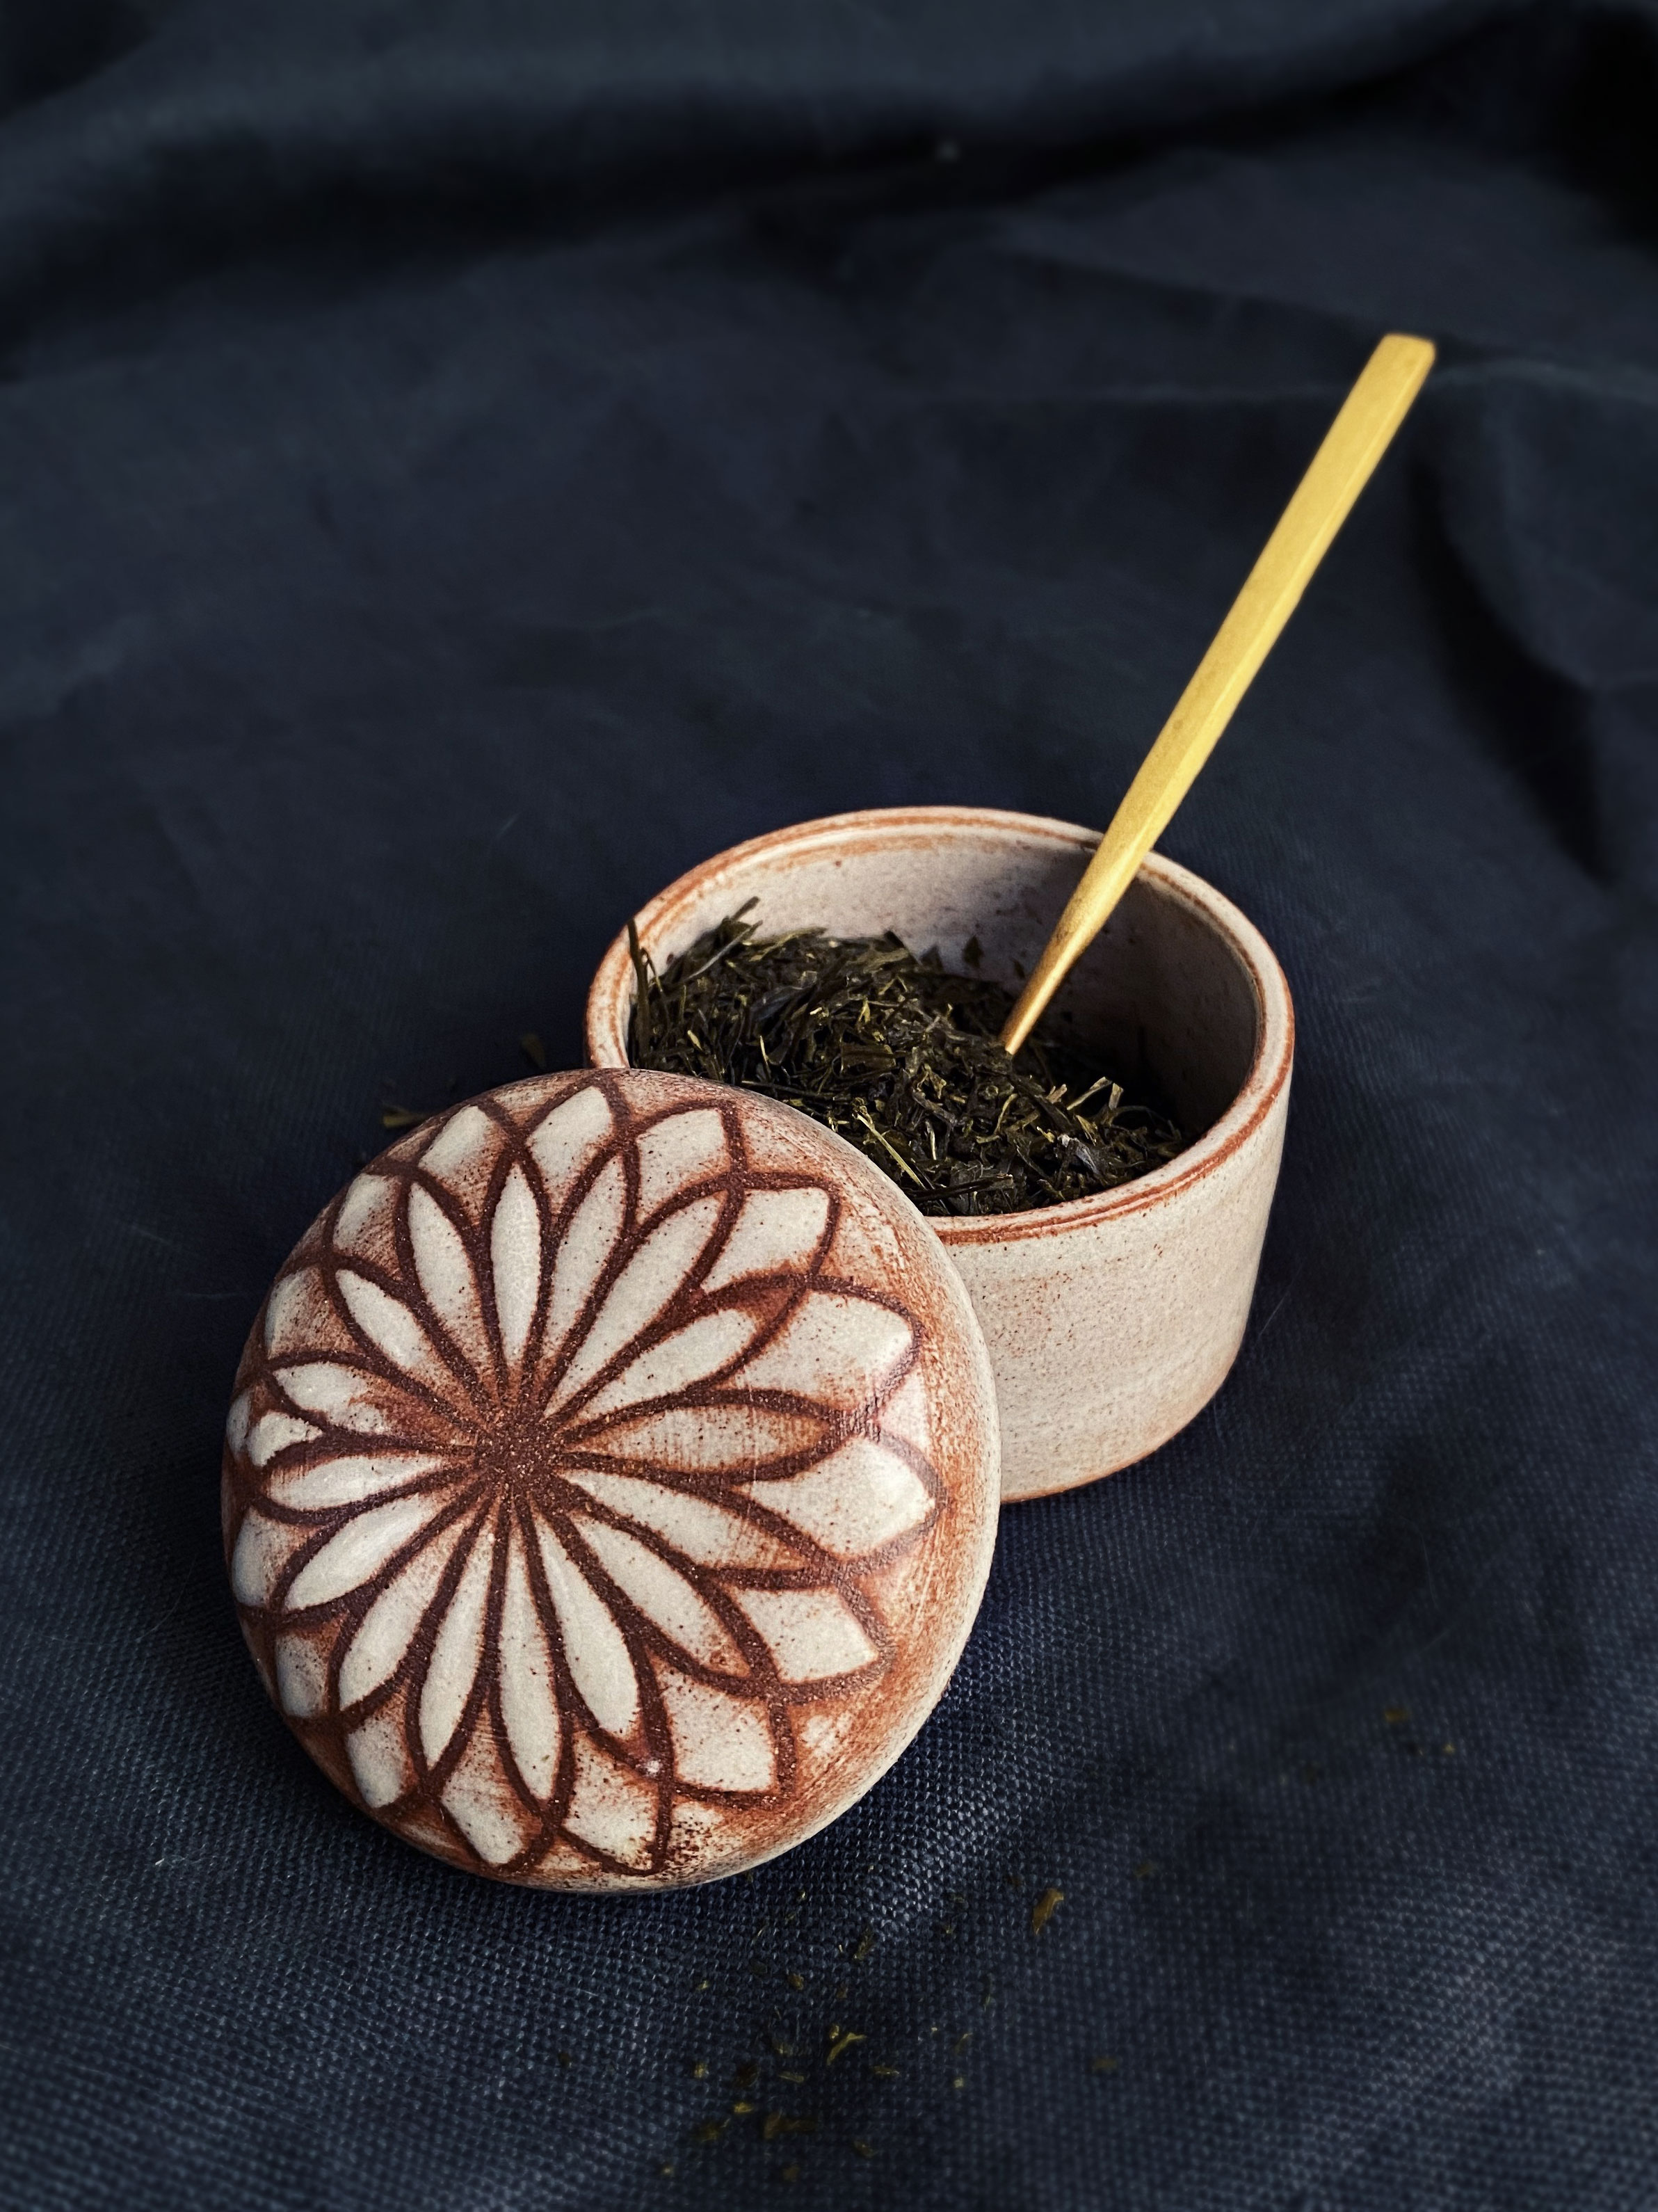 earthtone ceramic jar holding tea leaves and spoon with lid with lotus pattern